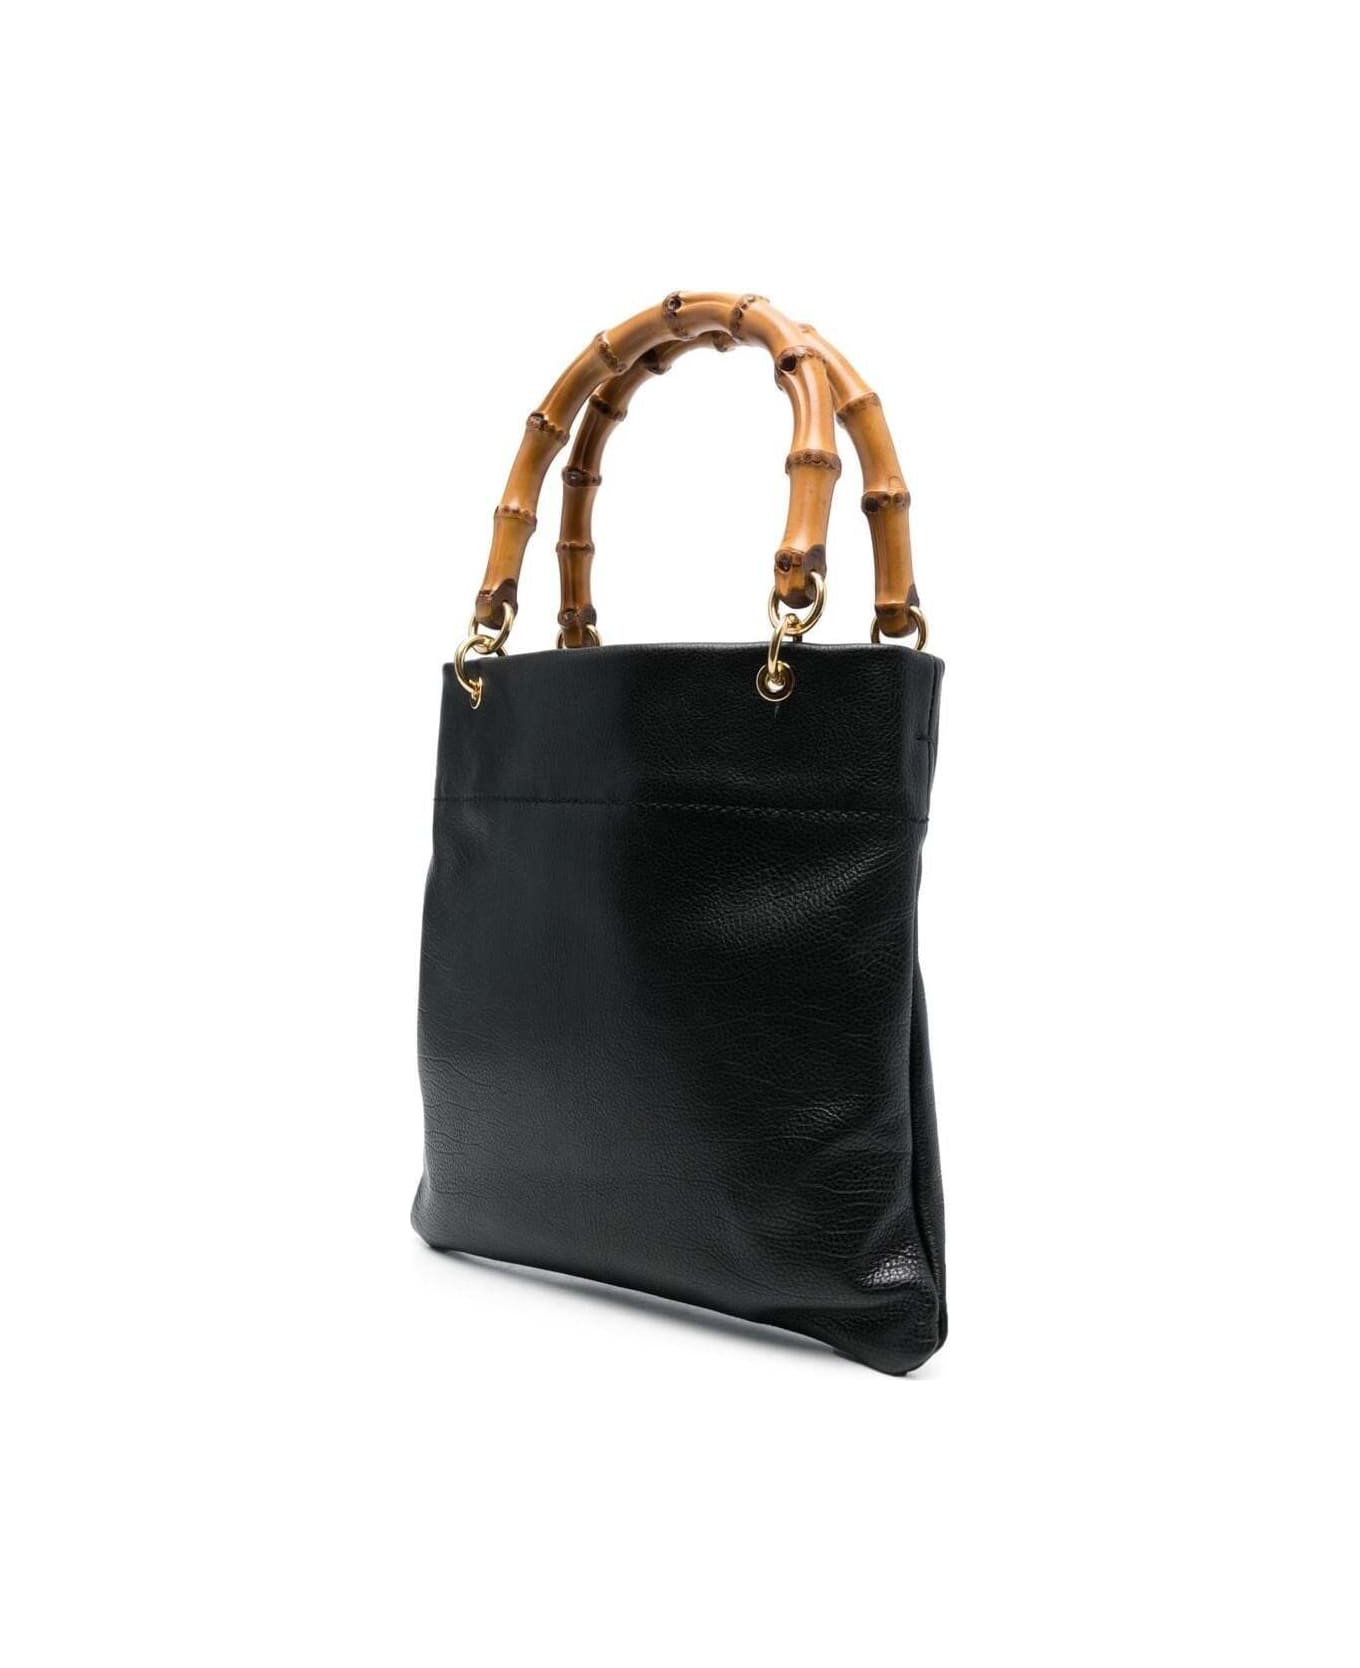 Jil Sander Small Black Tote Bag With Bamboo Handles In Leather Woman - Black